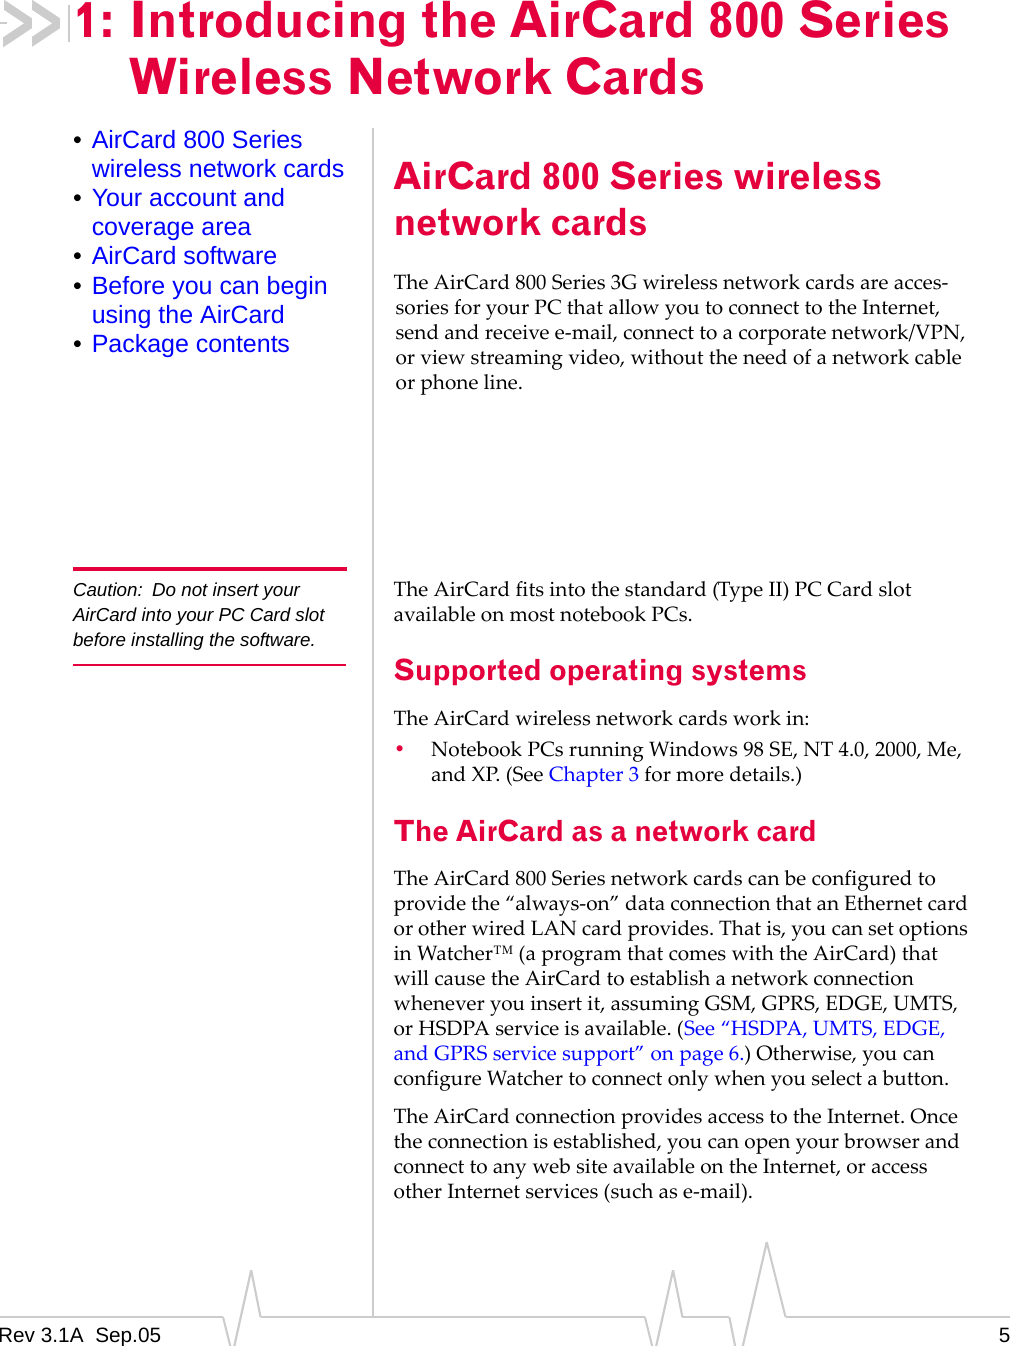 Rev 3.1A  Sep.05 51: Introducing the AirCard 800 Series Wireless Network Cards•AirCard 800 Series wireless network cards•Your account and coverage area•AirCard software•Before you can begin using the AirCard•Package contentsAirCard 800 Series wireless network cardsThe AirCard 800 Series 3G wireless network cards are acces-sories for your PC that allow you to connect to the Internet, send and receive e-mail, connect to a corporate network/VPN, or view streaming video, without the need of a network cable or phone line.Caution: Do not insert your AirCard into your PC Card slot before installing the software.The AirCard fits into the standard (Type II) PC Card slot available on most notebook PCs. Supported operating systemsThe AirCard wireless network cards work in:•Notebook PCs running Windows 98 SE, NT 4.0, 2000, Me, and XP. (See Chapter 3 for more details.)The AirCard as a network cardThe AirCard 800 Series network cards can be configured to provide the “always-on” data connection that an Ethernet card or other wired LAN card provides. That is, you can set options in Watcher™ (a program that comes with the AirCard) that will cause the AirCard to establish a network connection whenever you insert it, assuming GSM, GPRS, EDGE, UMTS, or HSDPA service is available. (See “HSDPA, UMTS, EDGE, and GPRS service support” on page 6.) Otherwise, you can configure Watcher to connect only when you select a button.The AirCard connection provides access to the Internet. Once the connection is established, you can open your browser and connect to any web site available on the Internet, or access other Internet services (such as e-mail). 